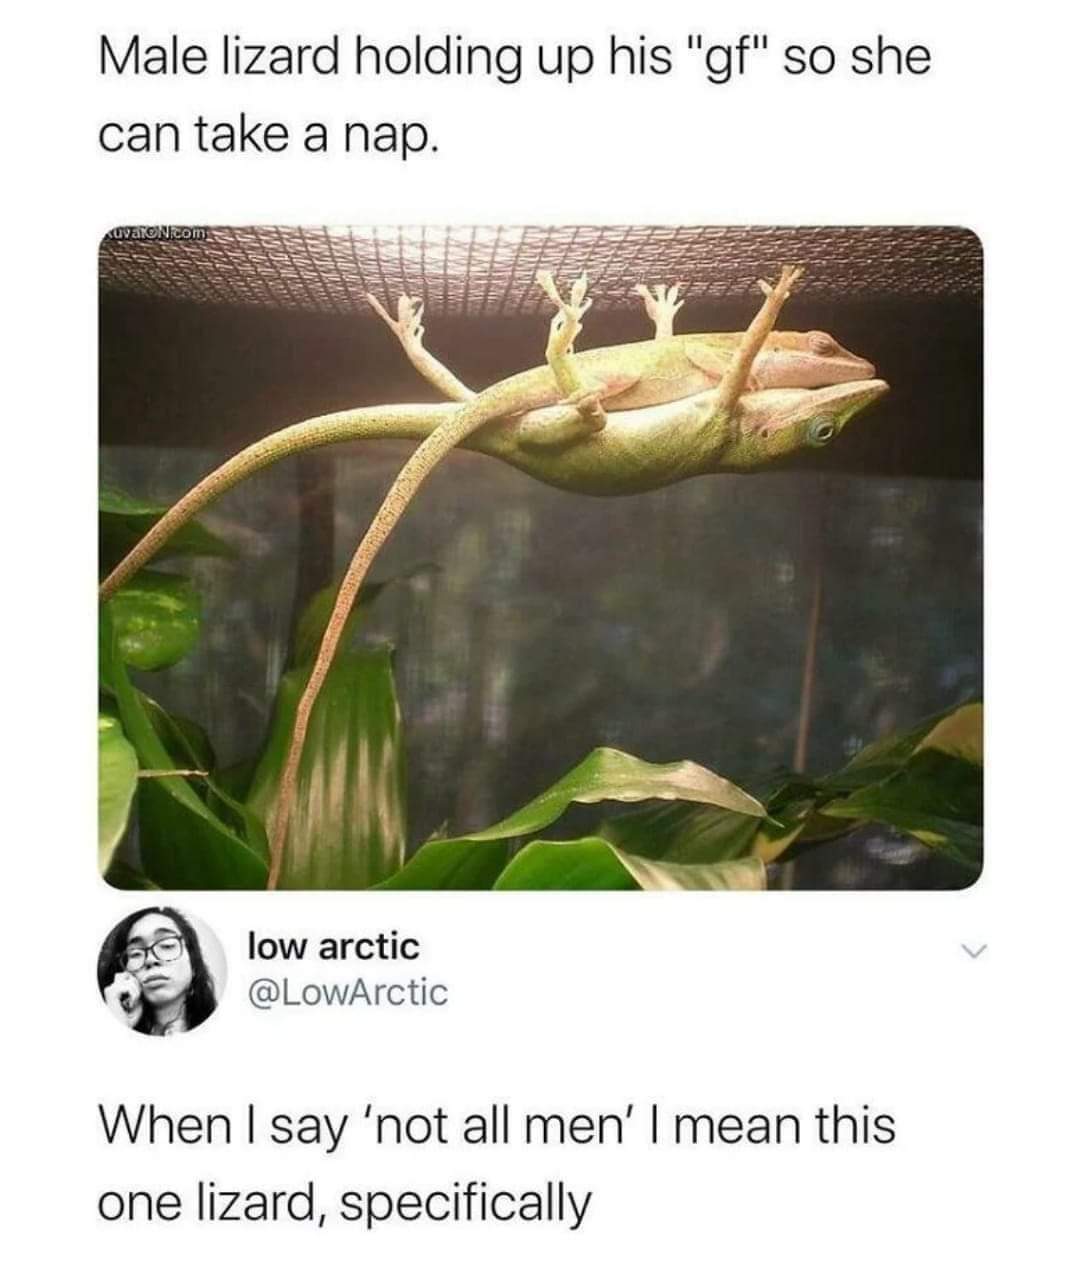 funny memes - dank memes - male lizard holding up his girlfriend - Male lizard holding up his "gf" so she can take a nap. VaRONiCom low arctic When I say 'not all men' I mean this one lizard, specifically